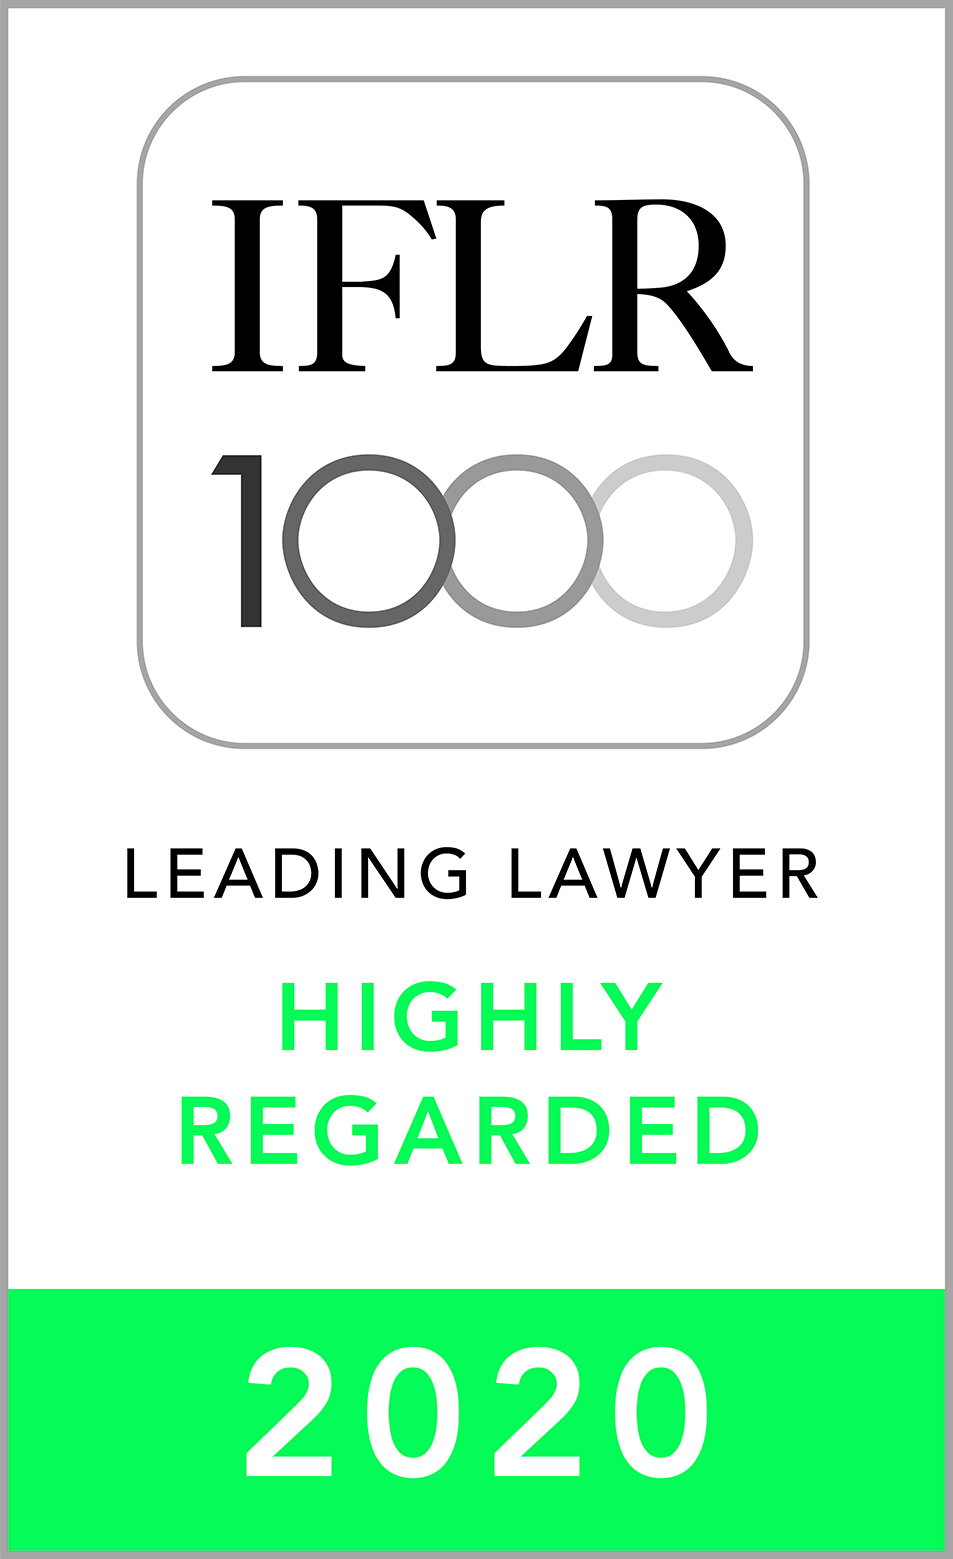 Highly Regarded Leading Lawyer in Financial & Corporate Law by IFLR1000, 2020